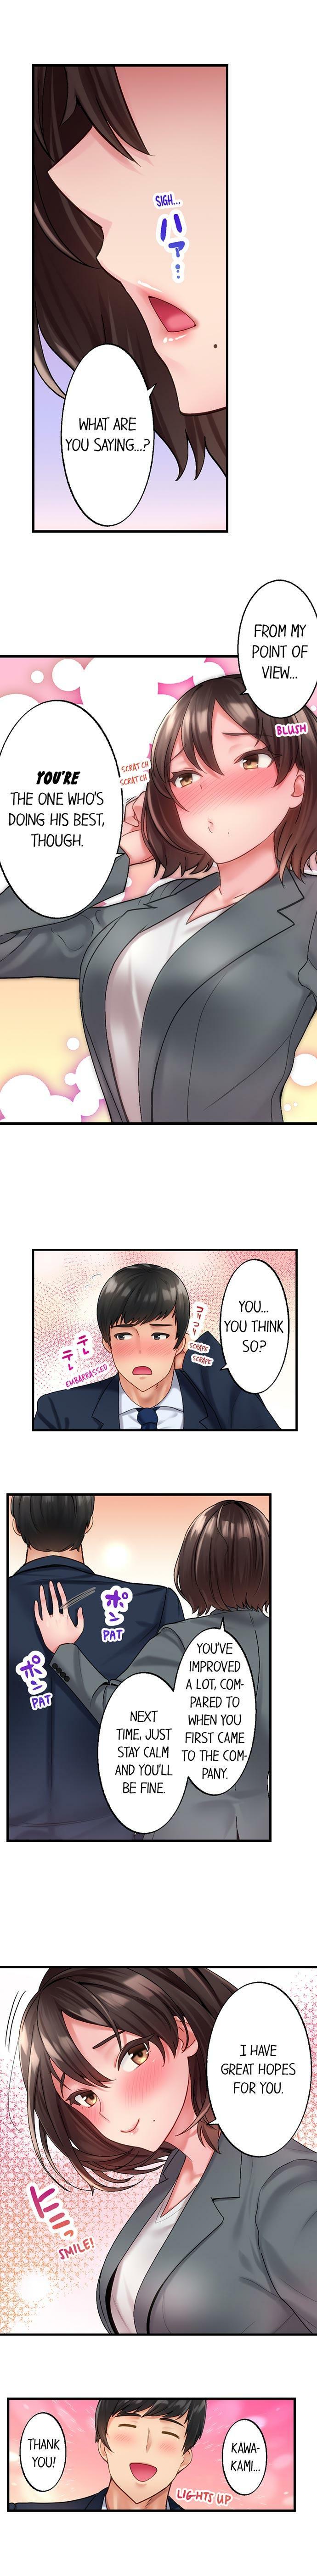 Freeteenporn [Kayanoi Ino] Busted by my Co-Worker 18/18 [English] Completed Oral Sex - Page 5